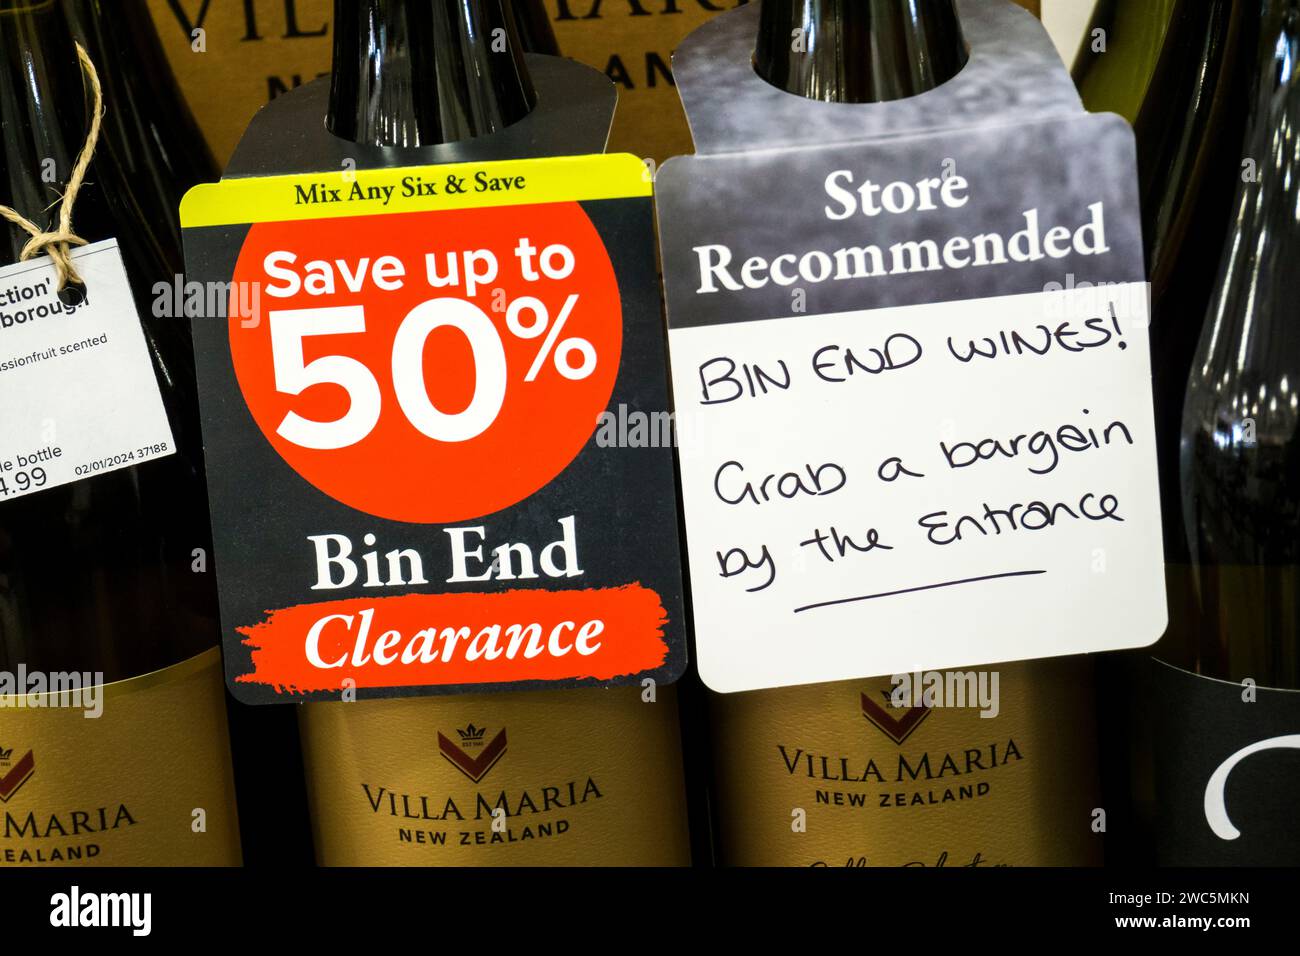 Signs advertising bin ends in a Majestic Wine off-licence. Stock Photo